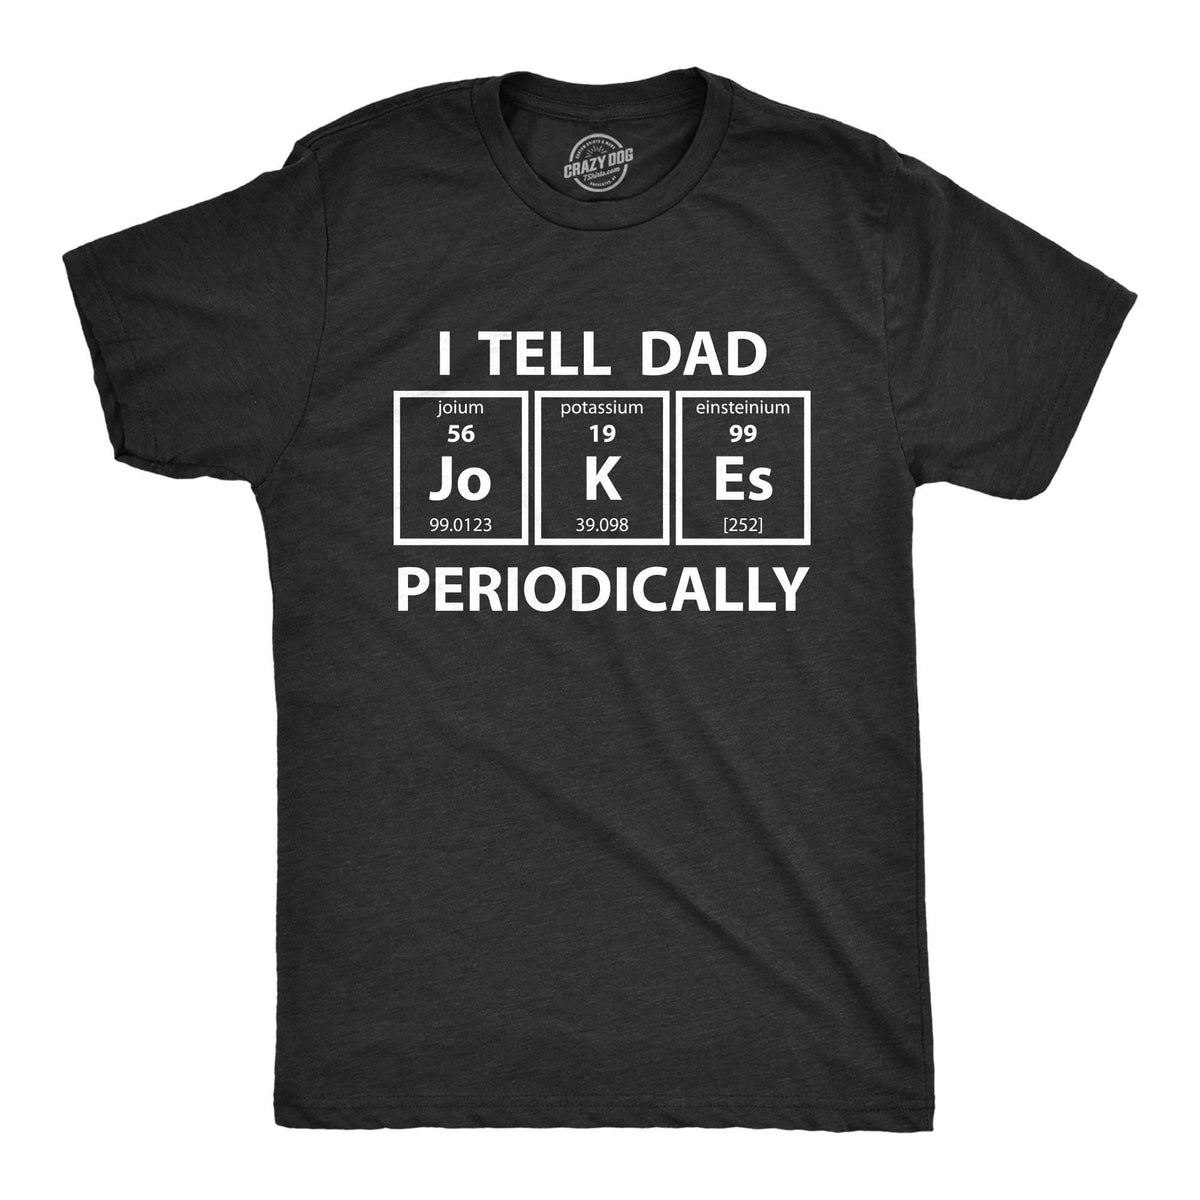 Crazy Dog Tshirts Mens I Tell Dad Jokes Periodically Tshirt Funny Science Fathers Day Nerdy Graphic Tee, Black